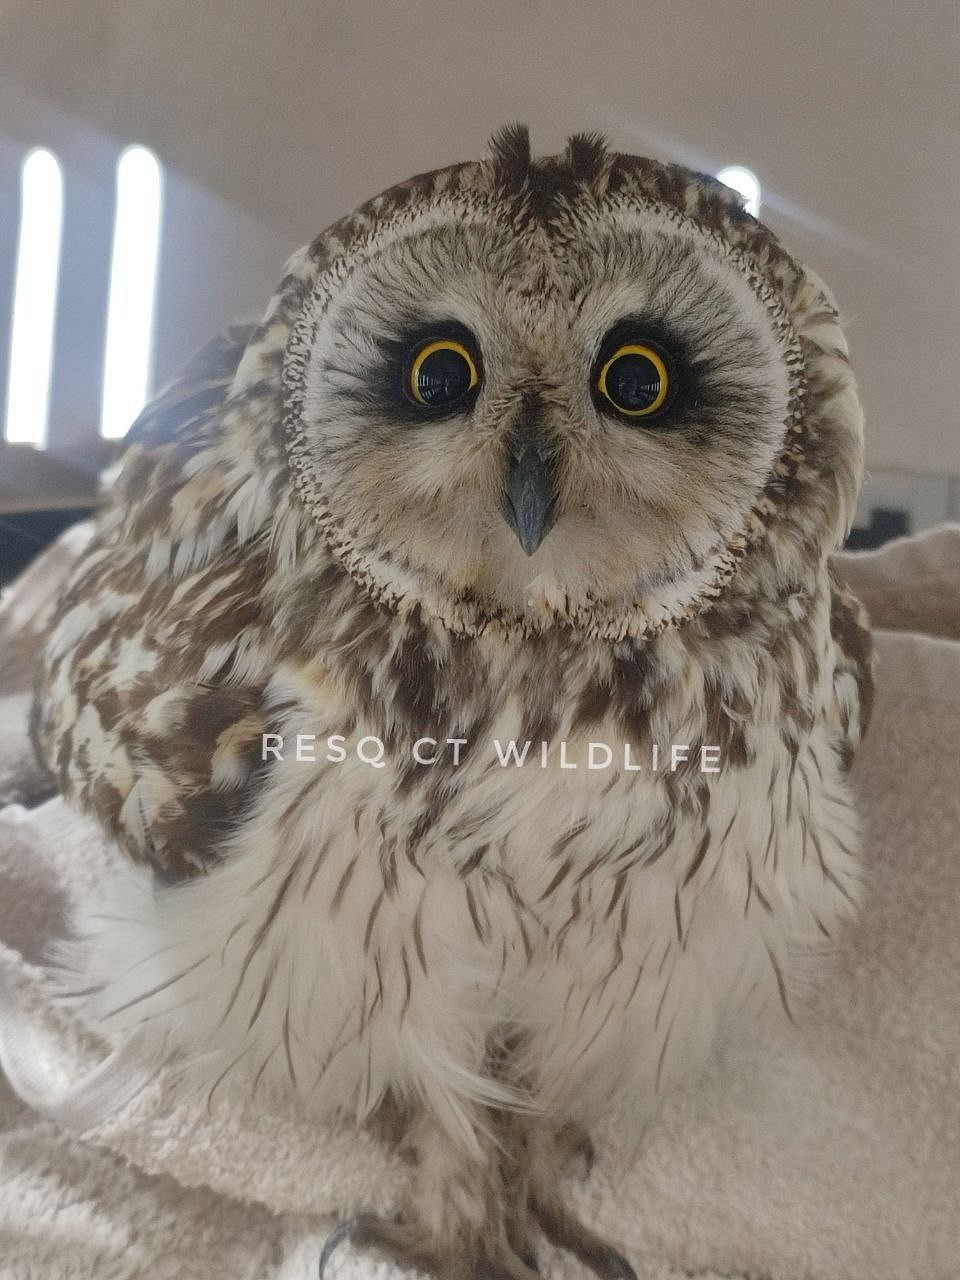 The rescued short-eared owl | Photo: RESQ CT